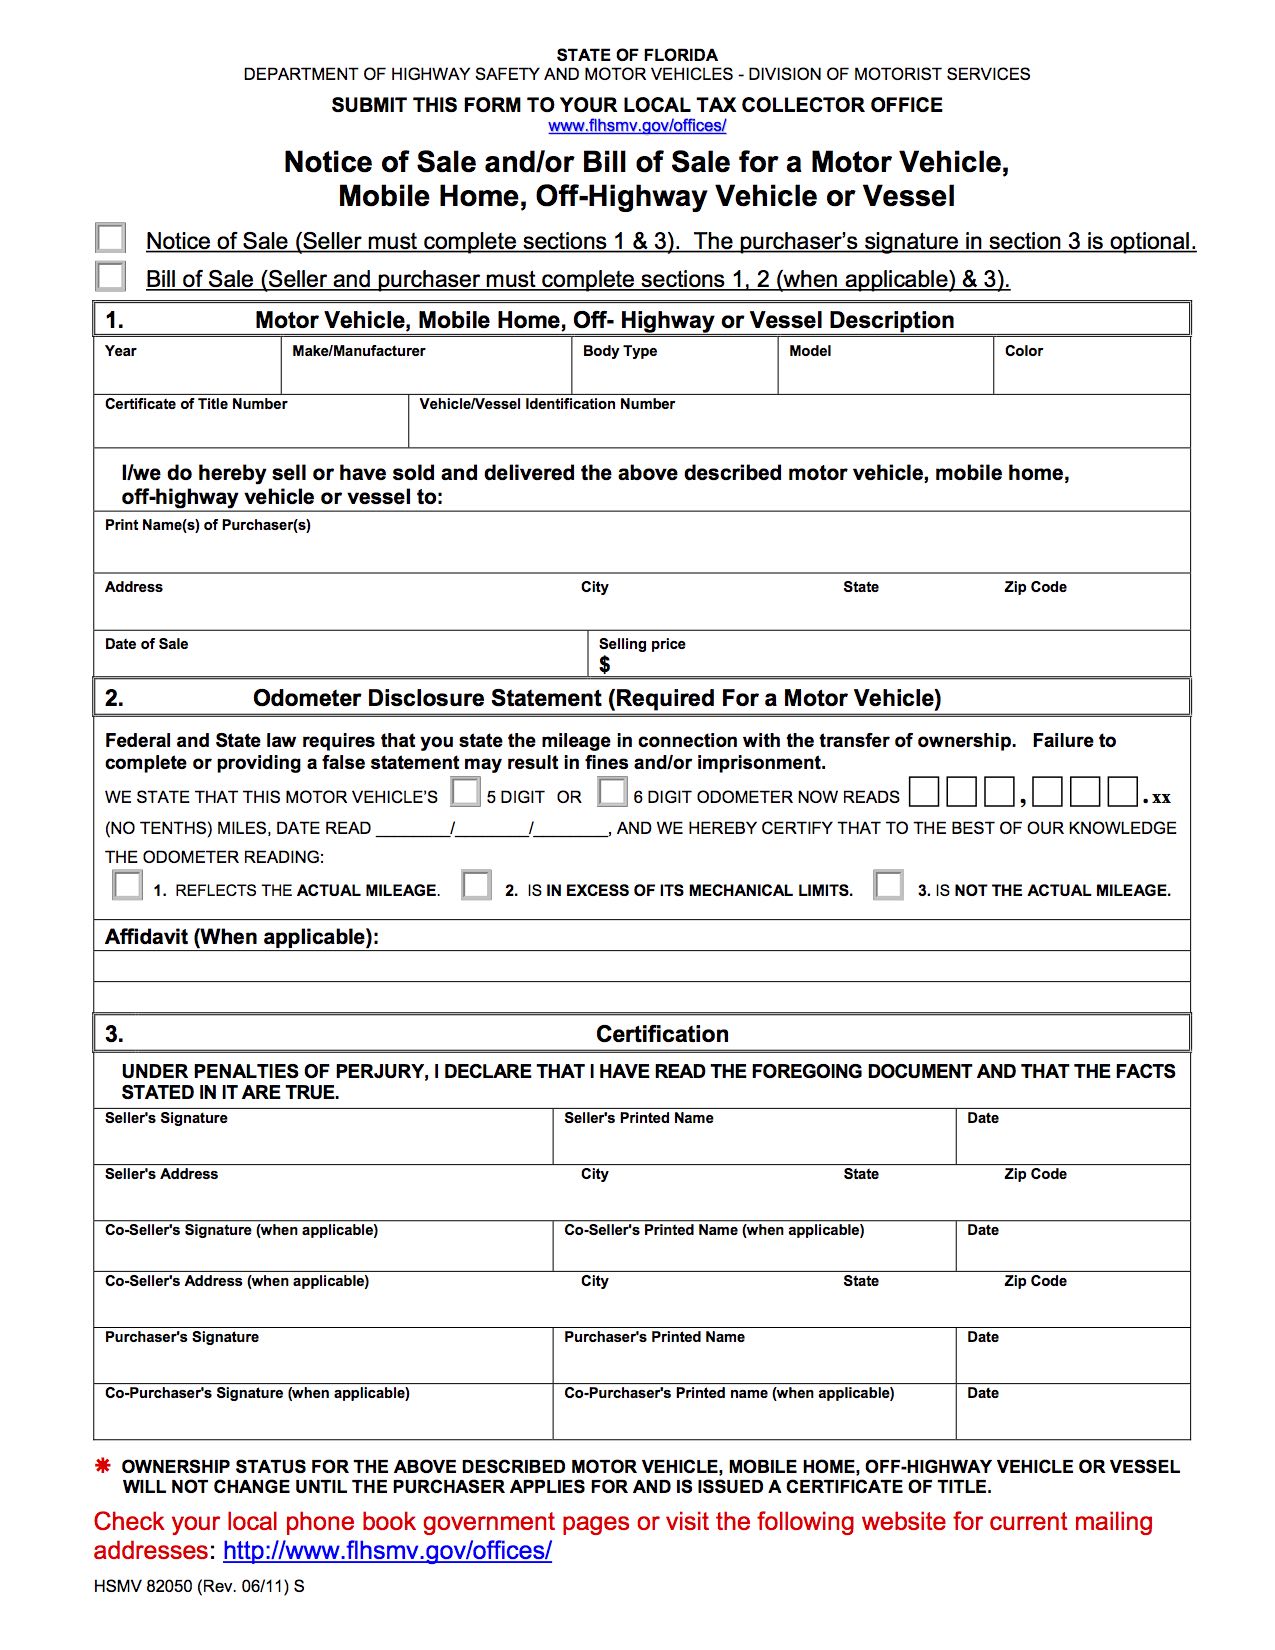 Free Florida Bill of Sale Form - PDF Template | LegalTemplates